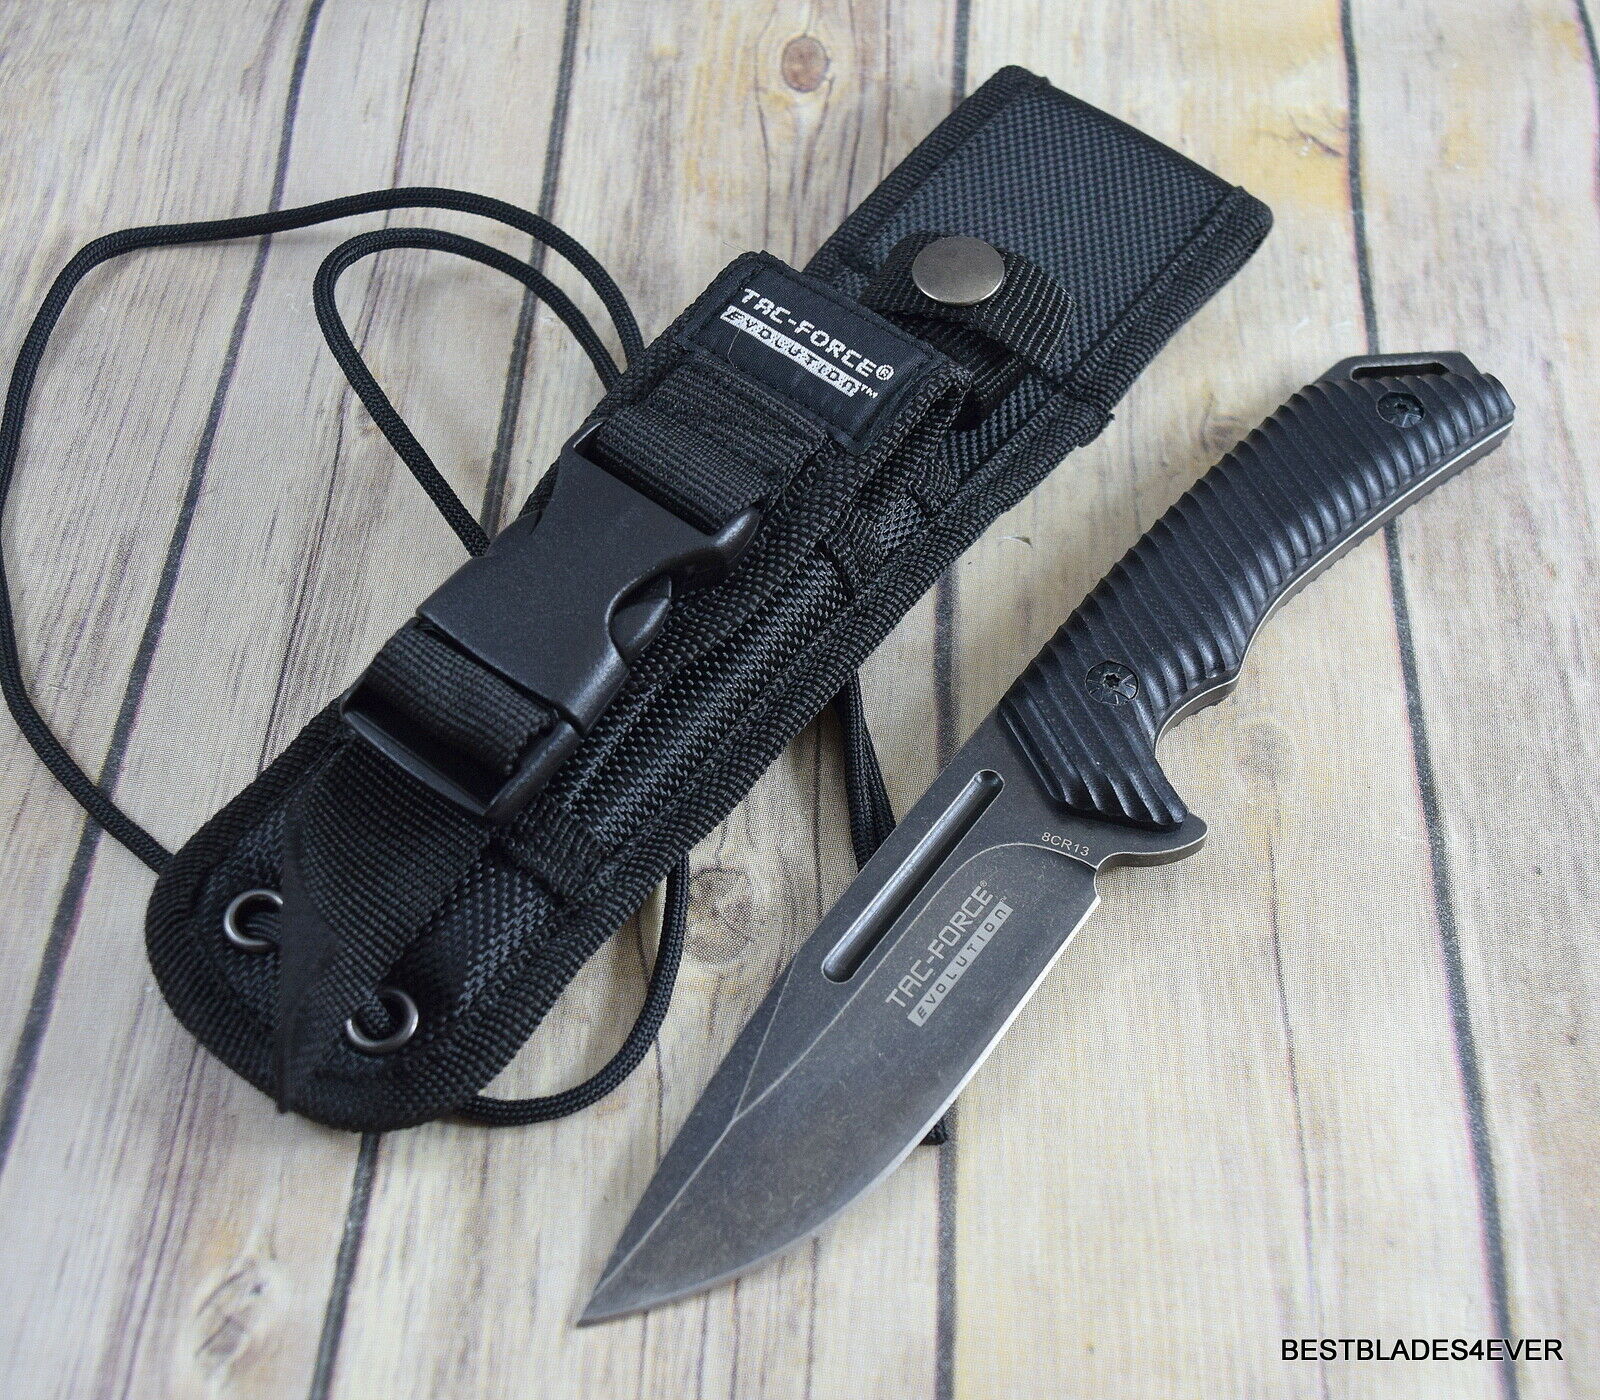 9" TAC-FORCE FIXED BLADE HUNTING KNIFE FULL TANG BLADE WITH MOLLE SHEATH